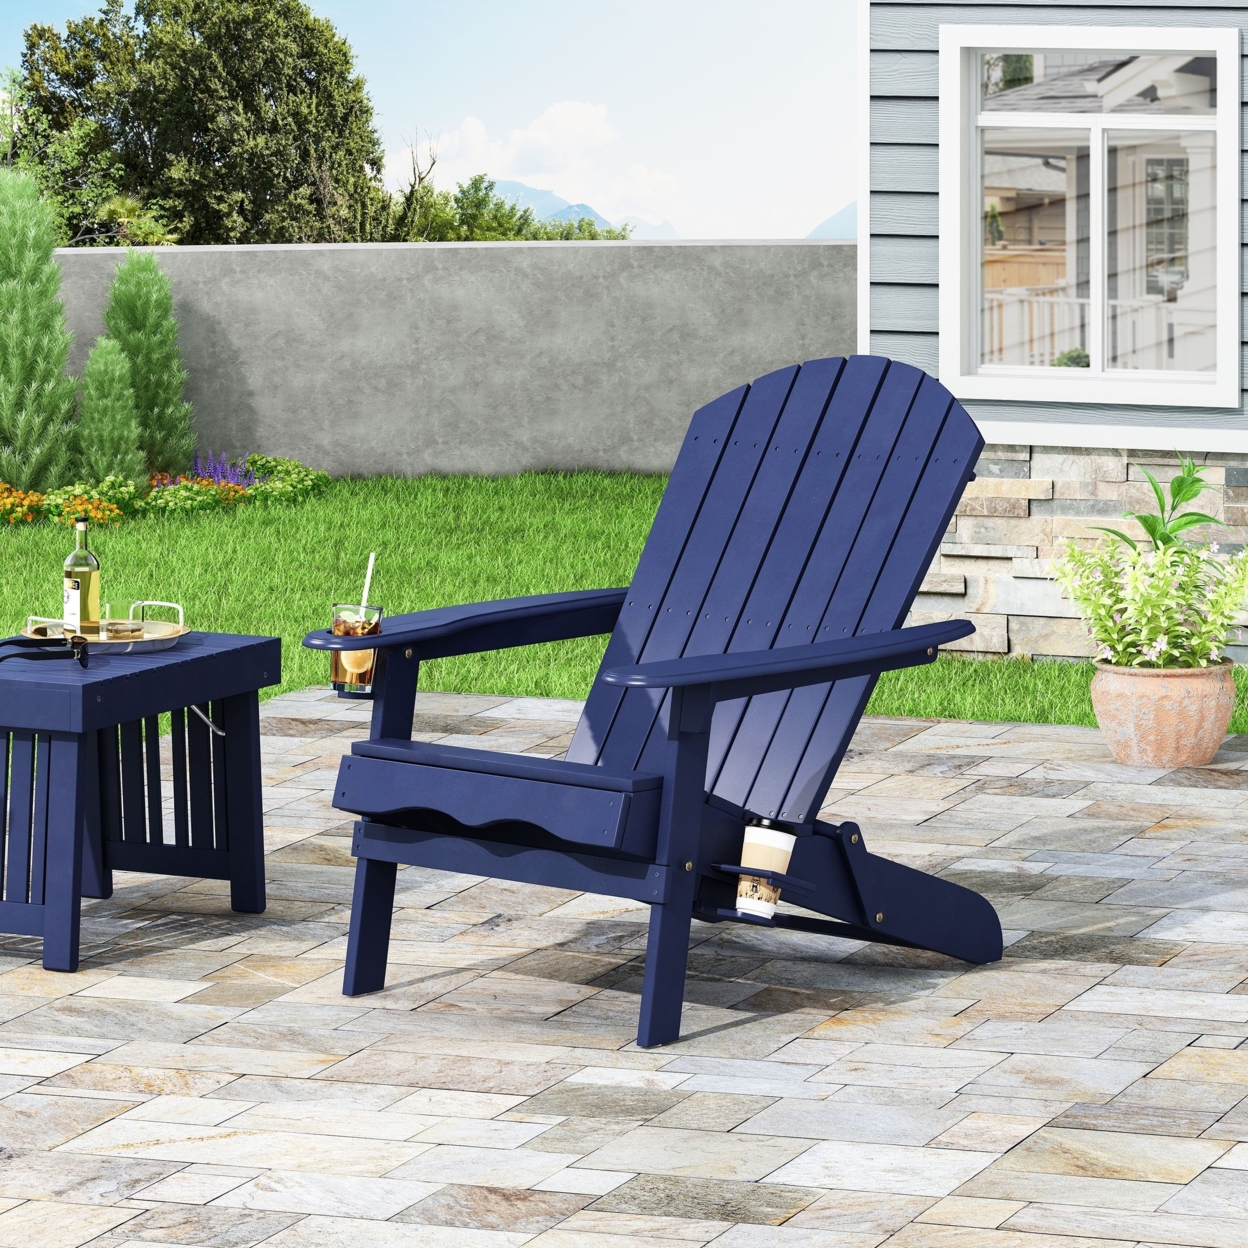 Kandyce Outdoor Acacia Wood Folding Adirondack Chair With Cup Holder - Navy Blue